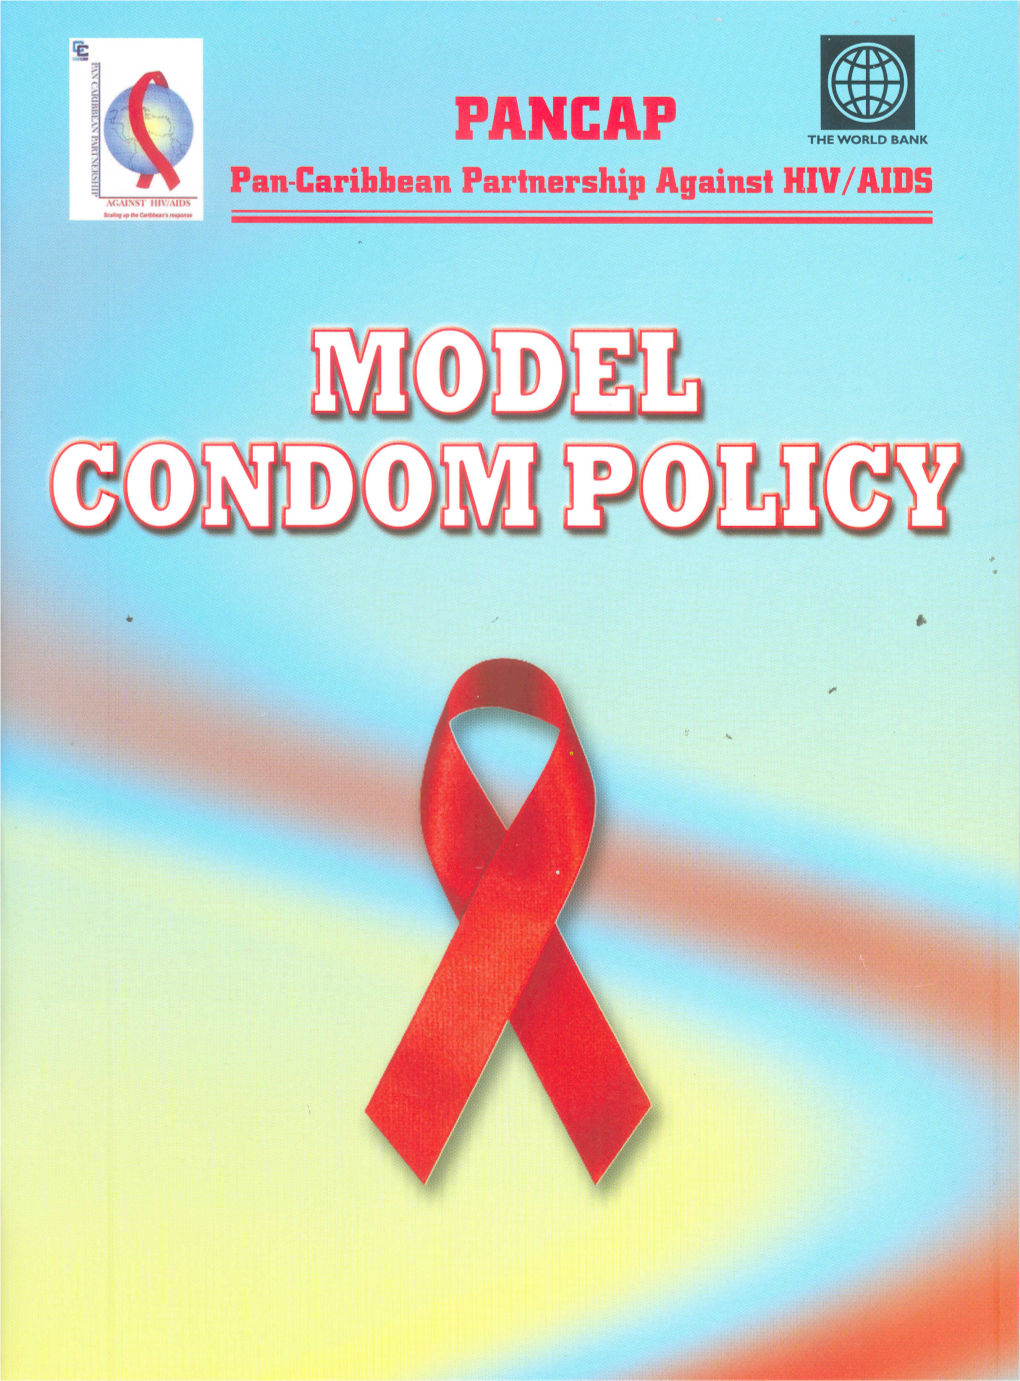 Elements of the PANCAP Model Condom Policy